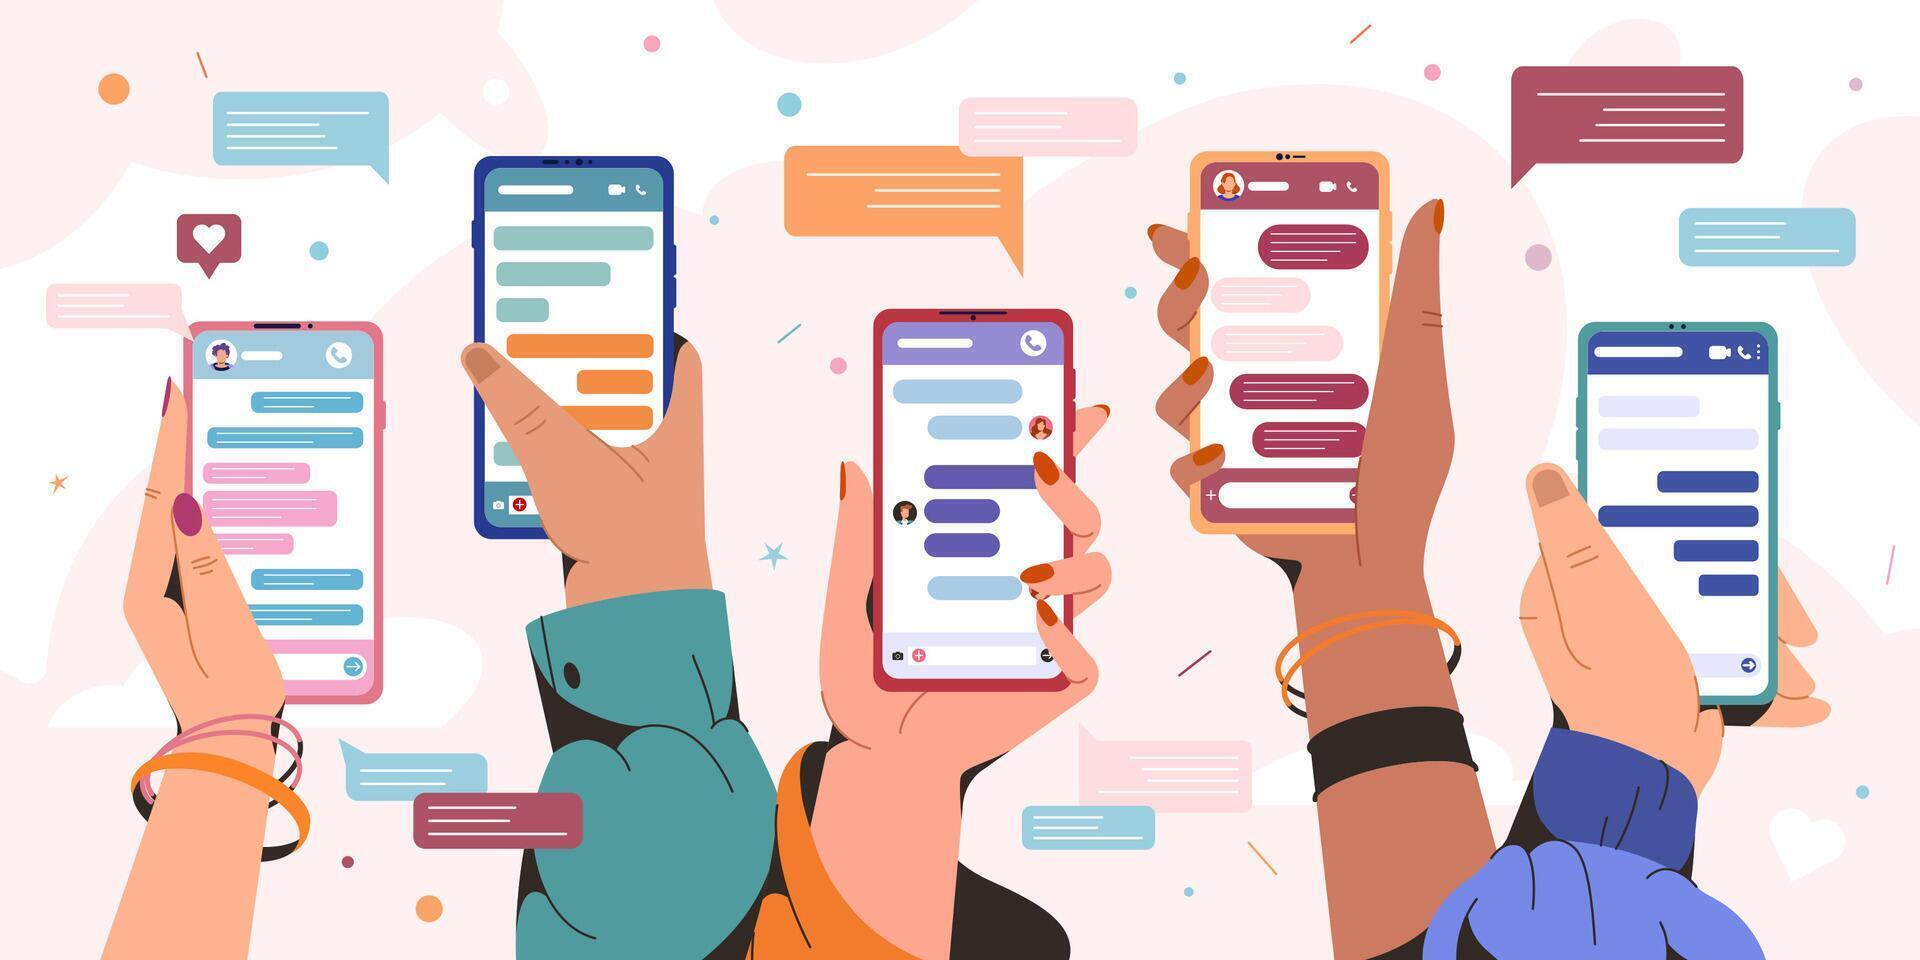 Hands holding smartphones with message chart. People chatting with friends and sending new messages. Sms bubbles boxes on mobile phone screen. Social media communication concept in flat style. vector